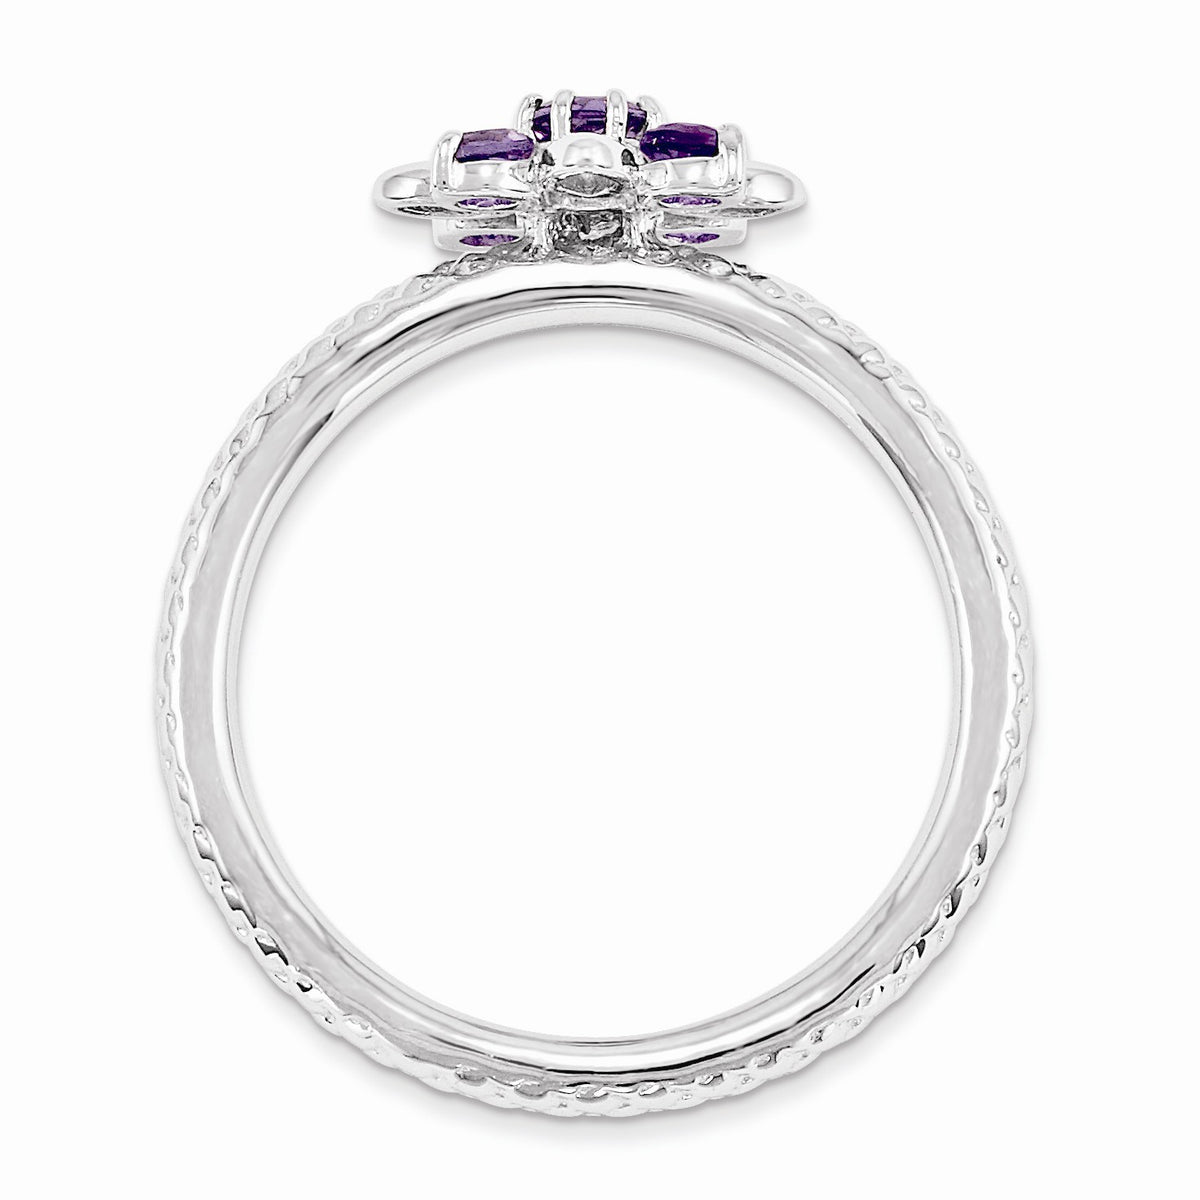 Alternate view of the Sterling Silver &amp; Amethyst Stackable 5 Round Stone Flower Ring by The Black Bow Jewelry Co.